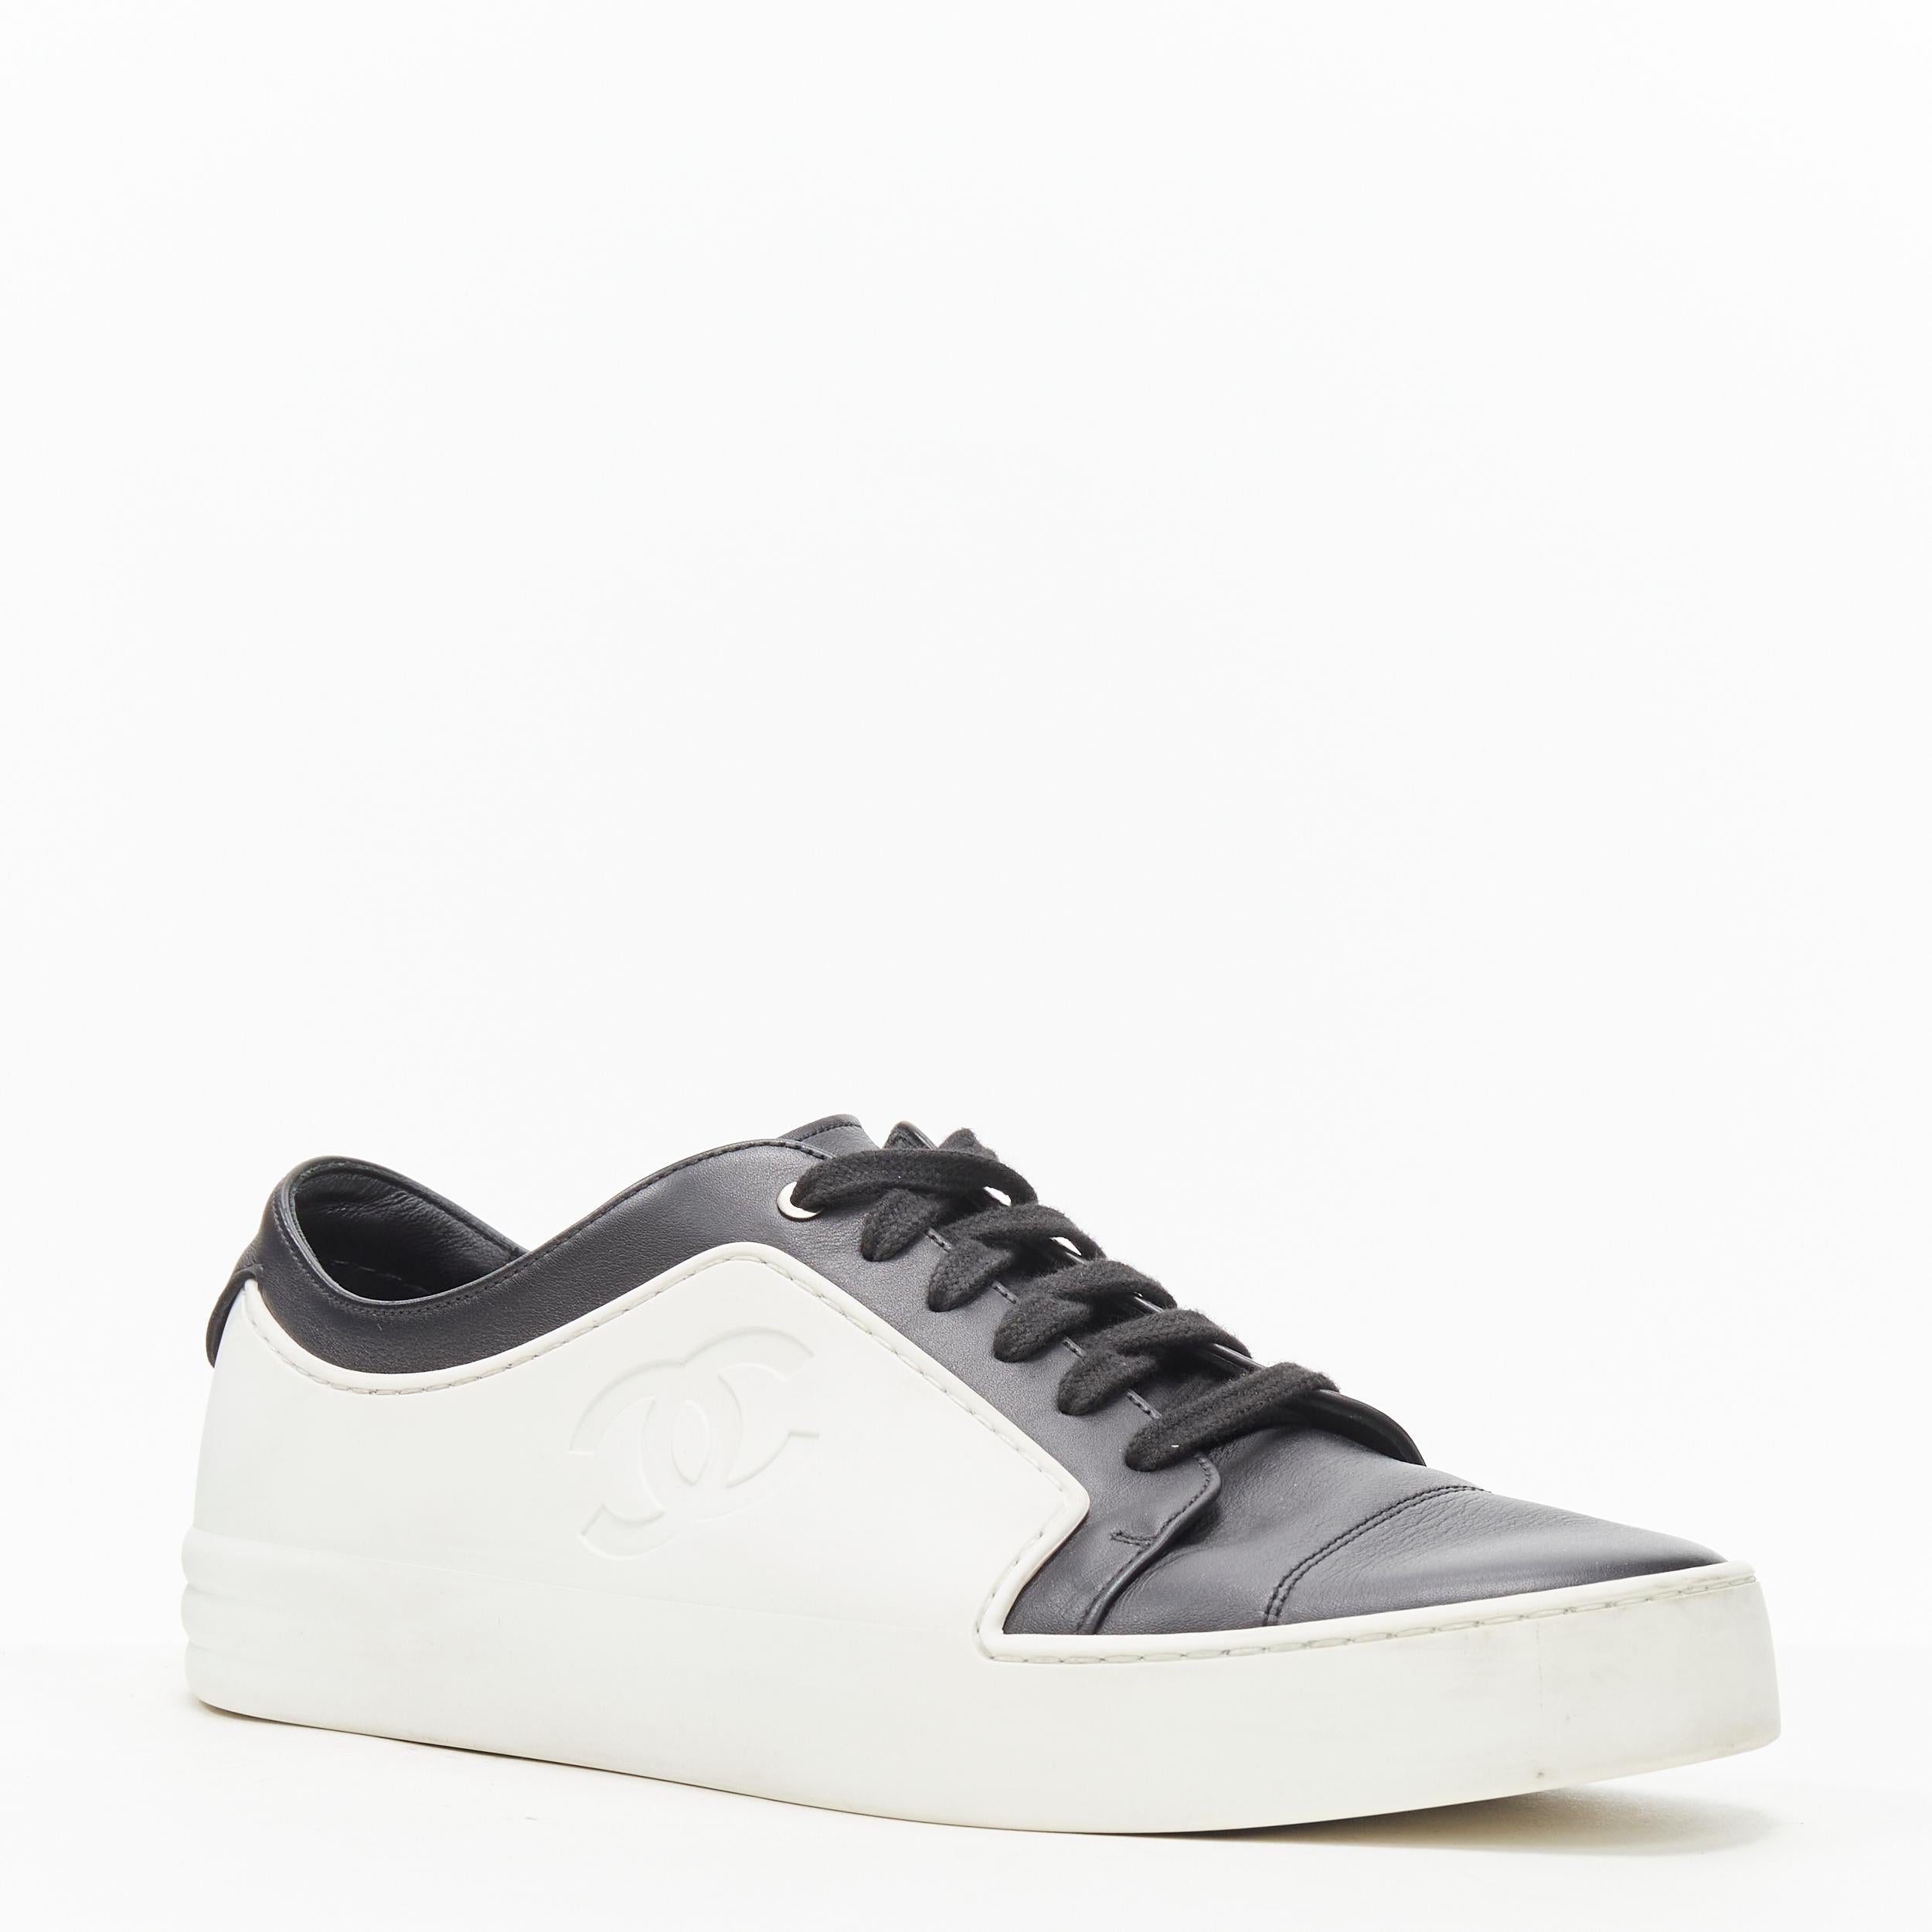 rare CHANEL interlocking CC white rubber black leather low top sneaker EU43 Reference: TGAS/B01066 
Brand: Chanel 
Model: CC rubber black leather sneaker 
Material: Rubber 
Color: Black 
Pattern: Solid 
Closure: Lace Up 
Extra Detail: White rubber